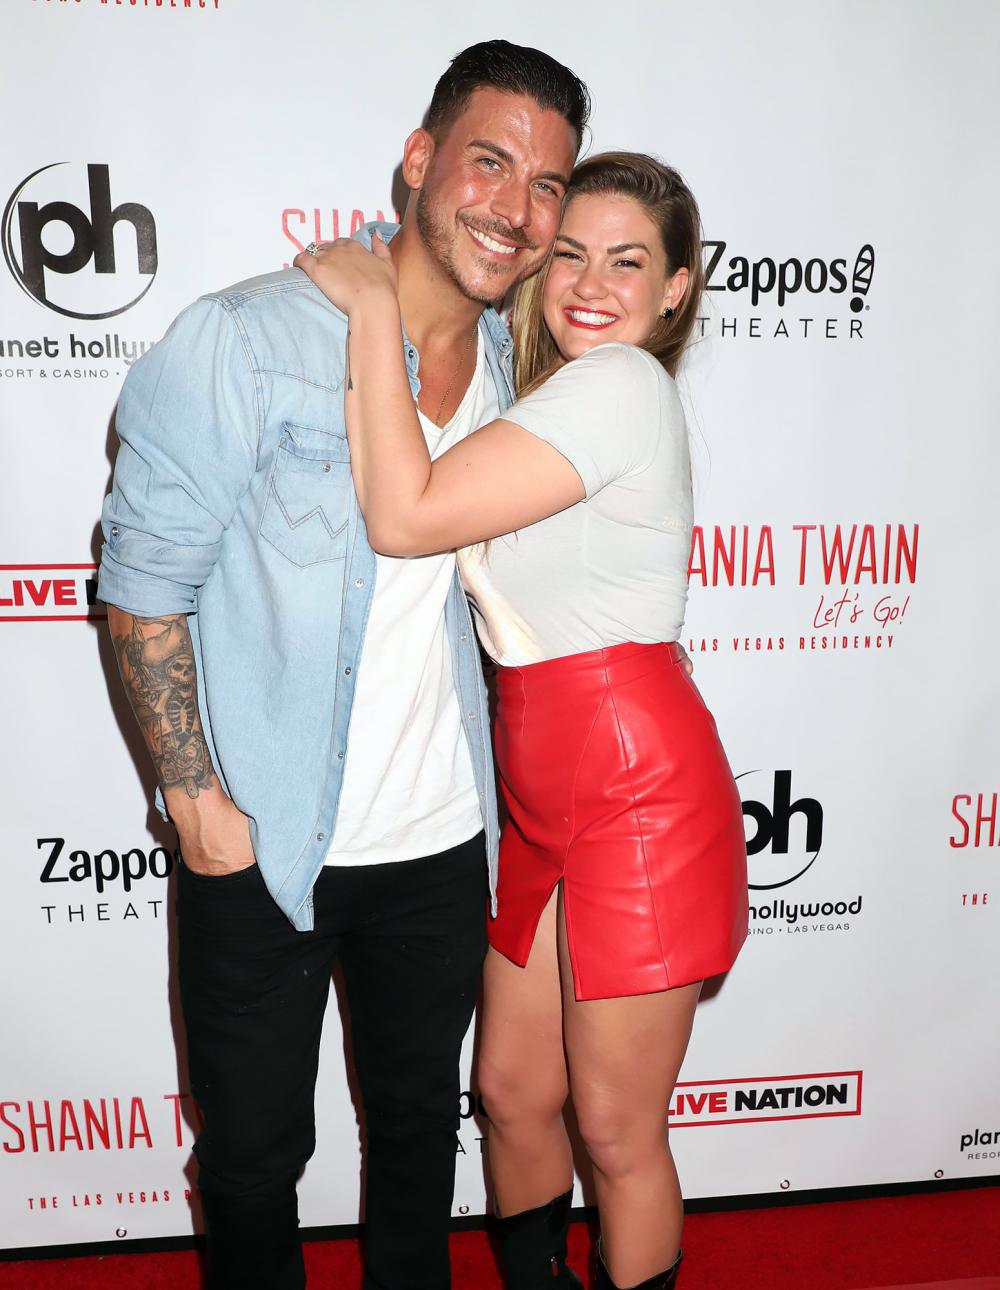 Jax Taylor and Brittany Cartwright Are 'Ready' to Make a 'Quarantine Baby'